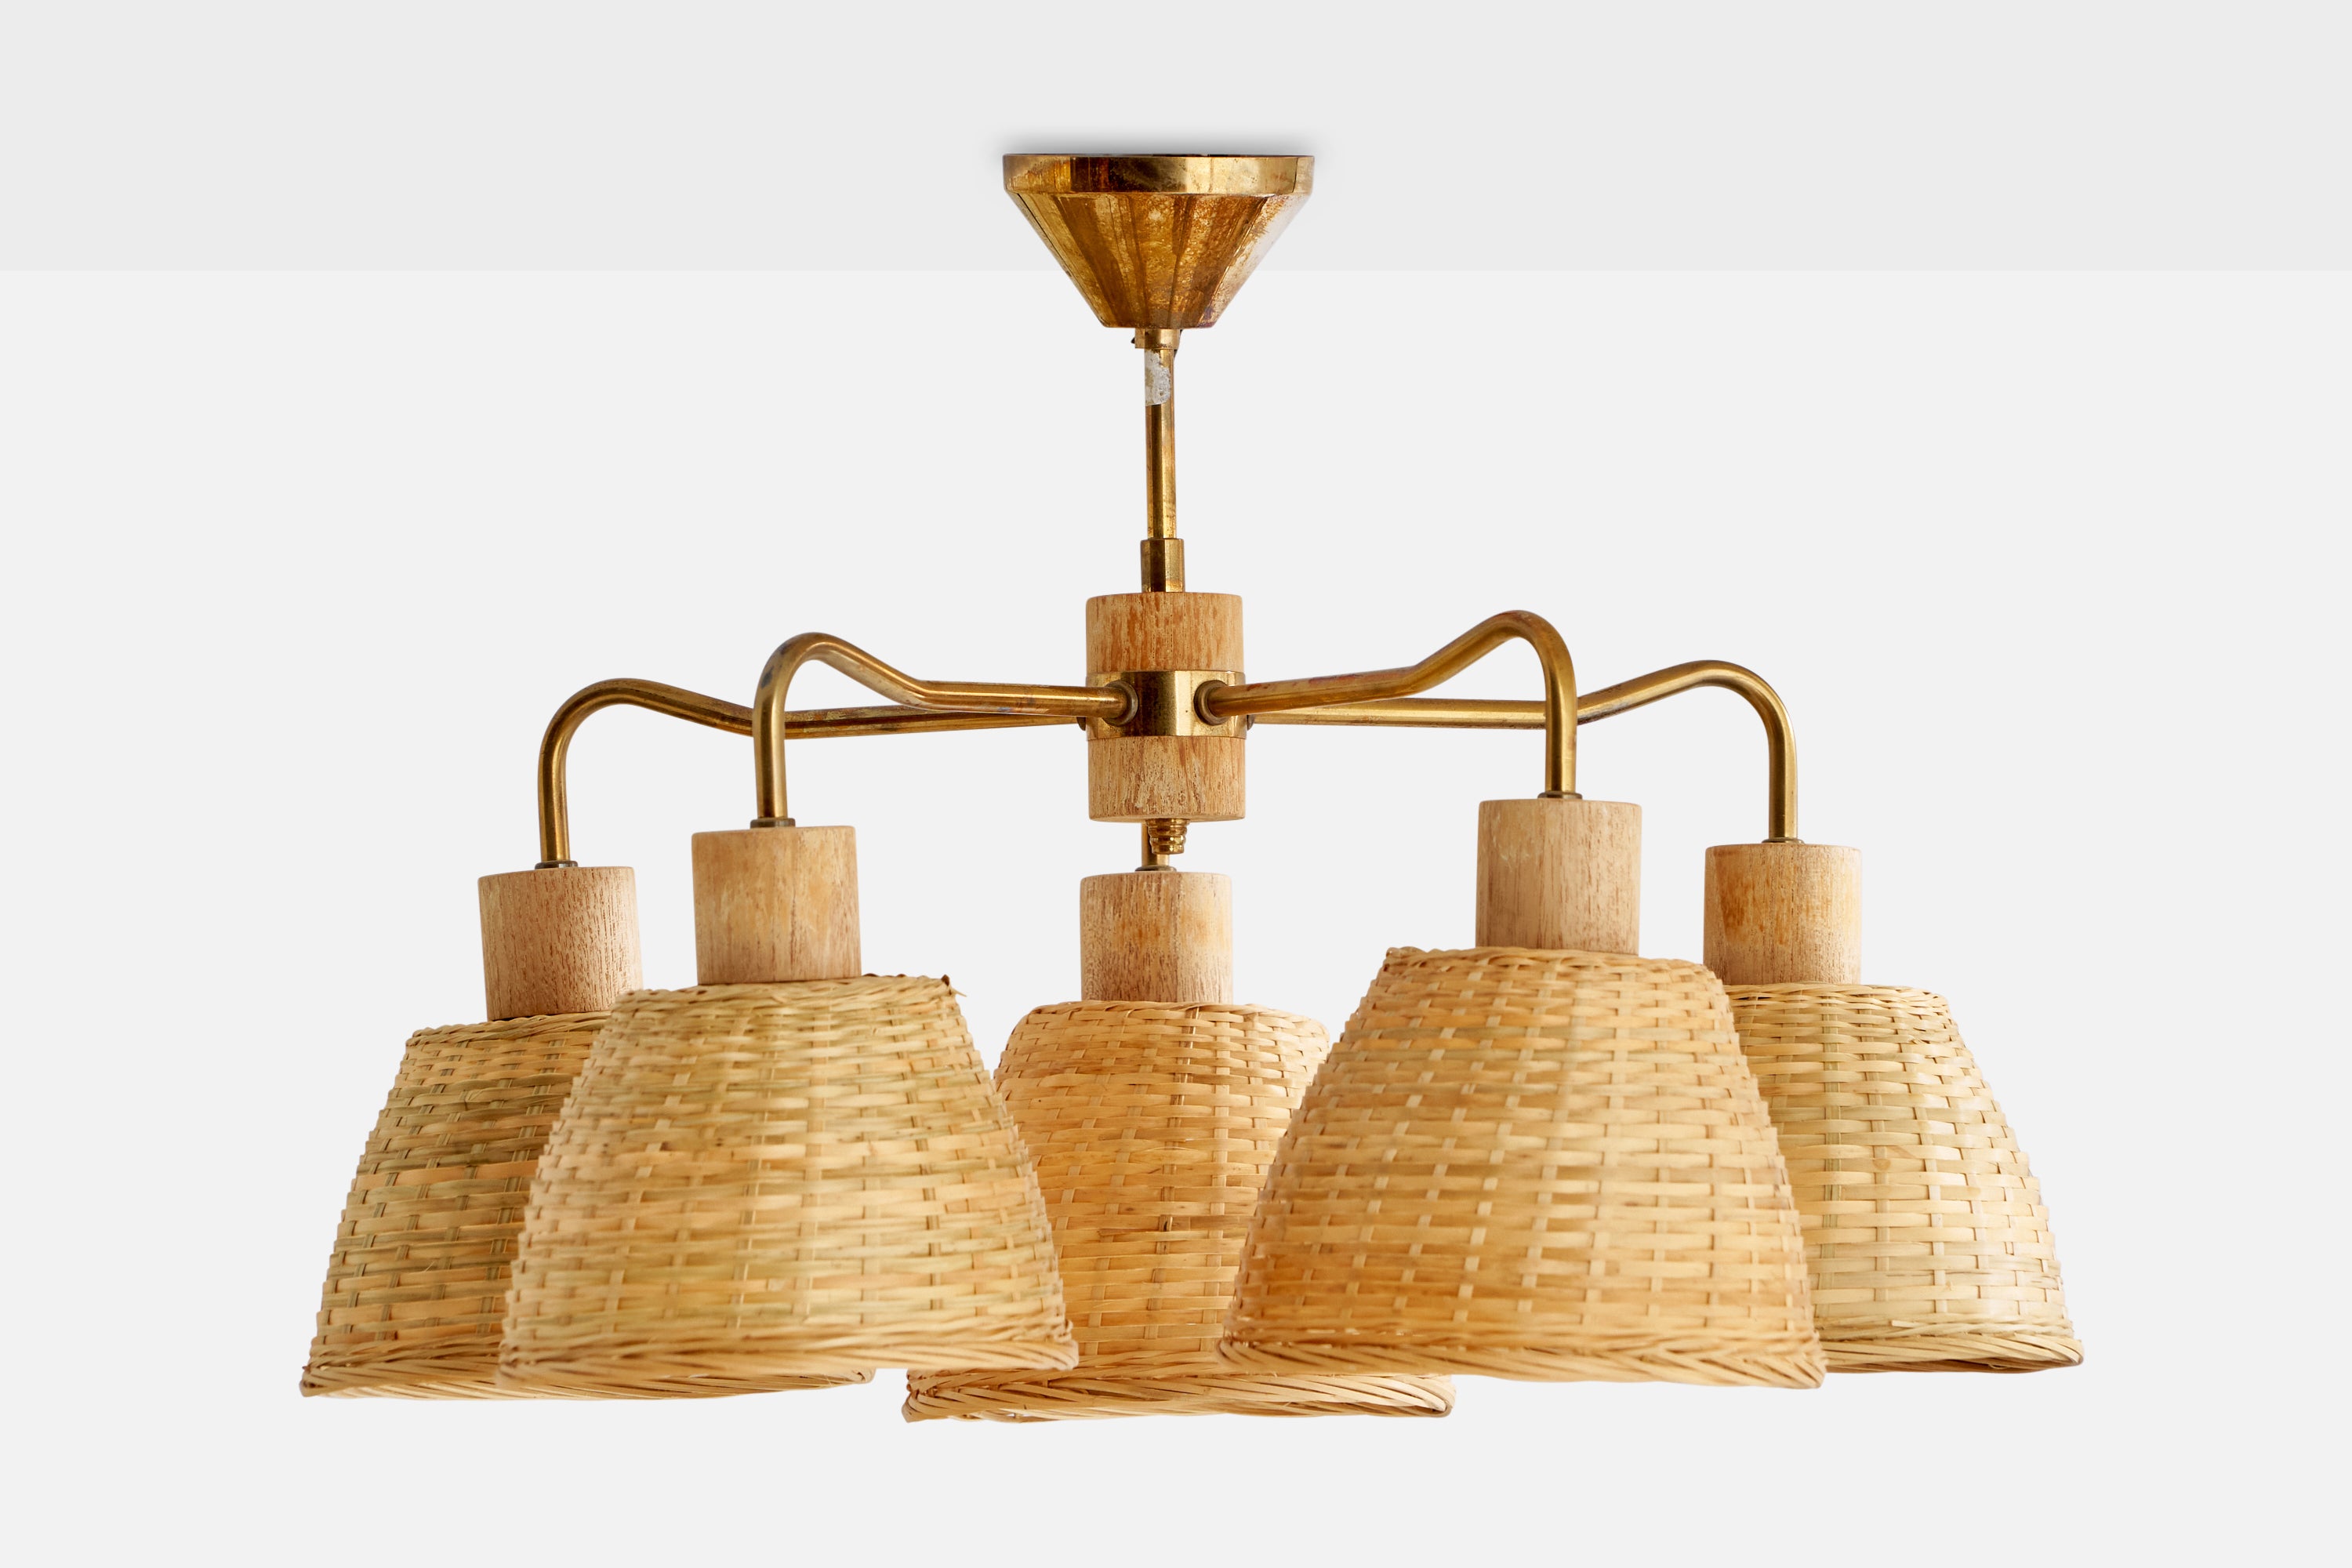 A brass, oak and rattan chandelier designed and produced in Sweden, 1950s.

Dimensions of canopy (inches): 2.38” H x 2.8” Diameter
Socket takes standard E-26 bulbs. 5 sockets.There is no maximum wattage stated on the fixture. All lighting will be